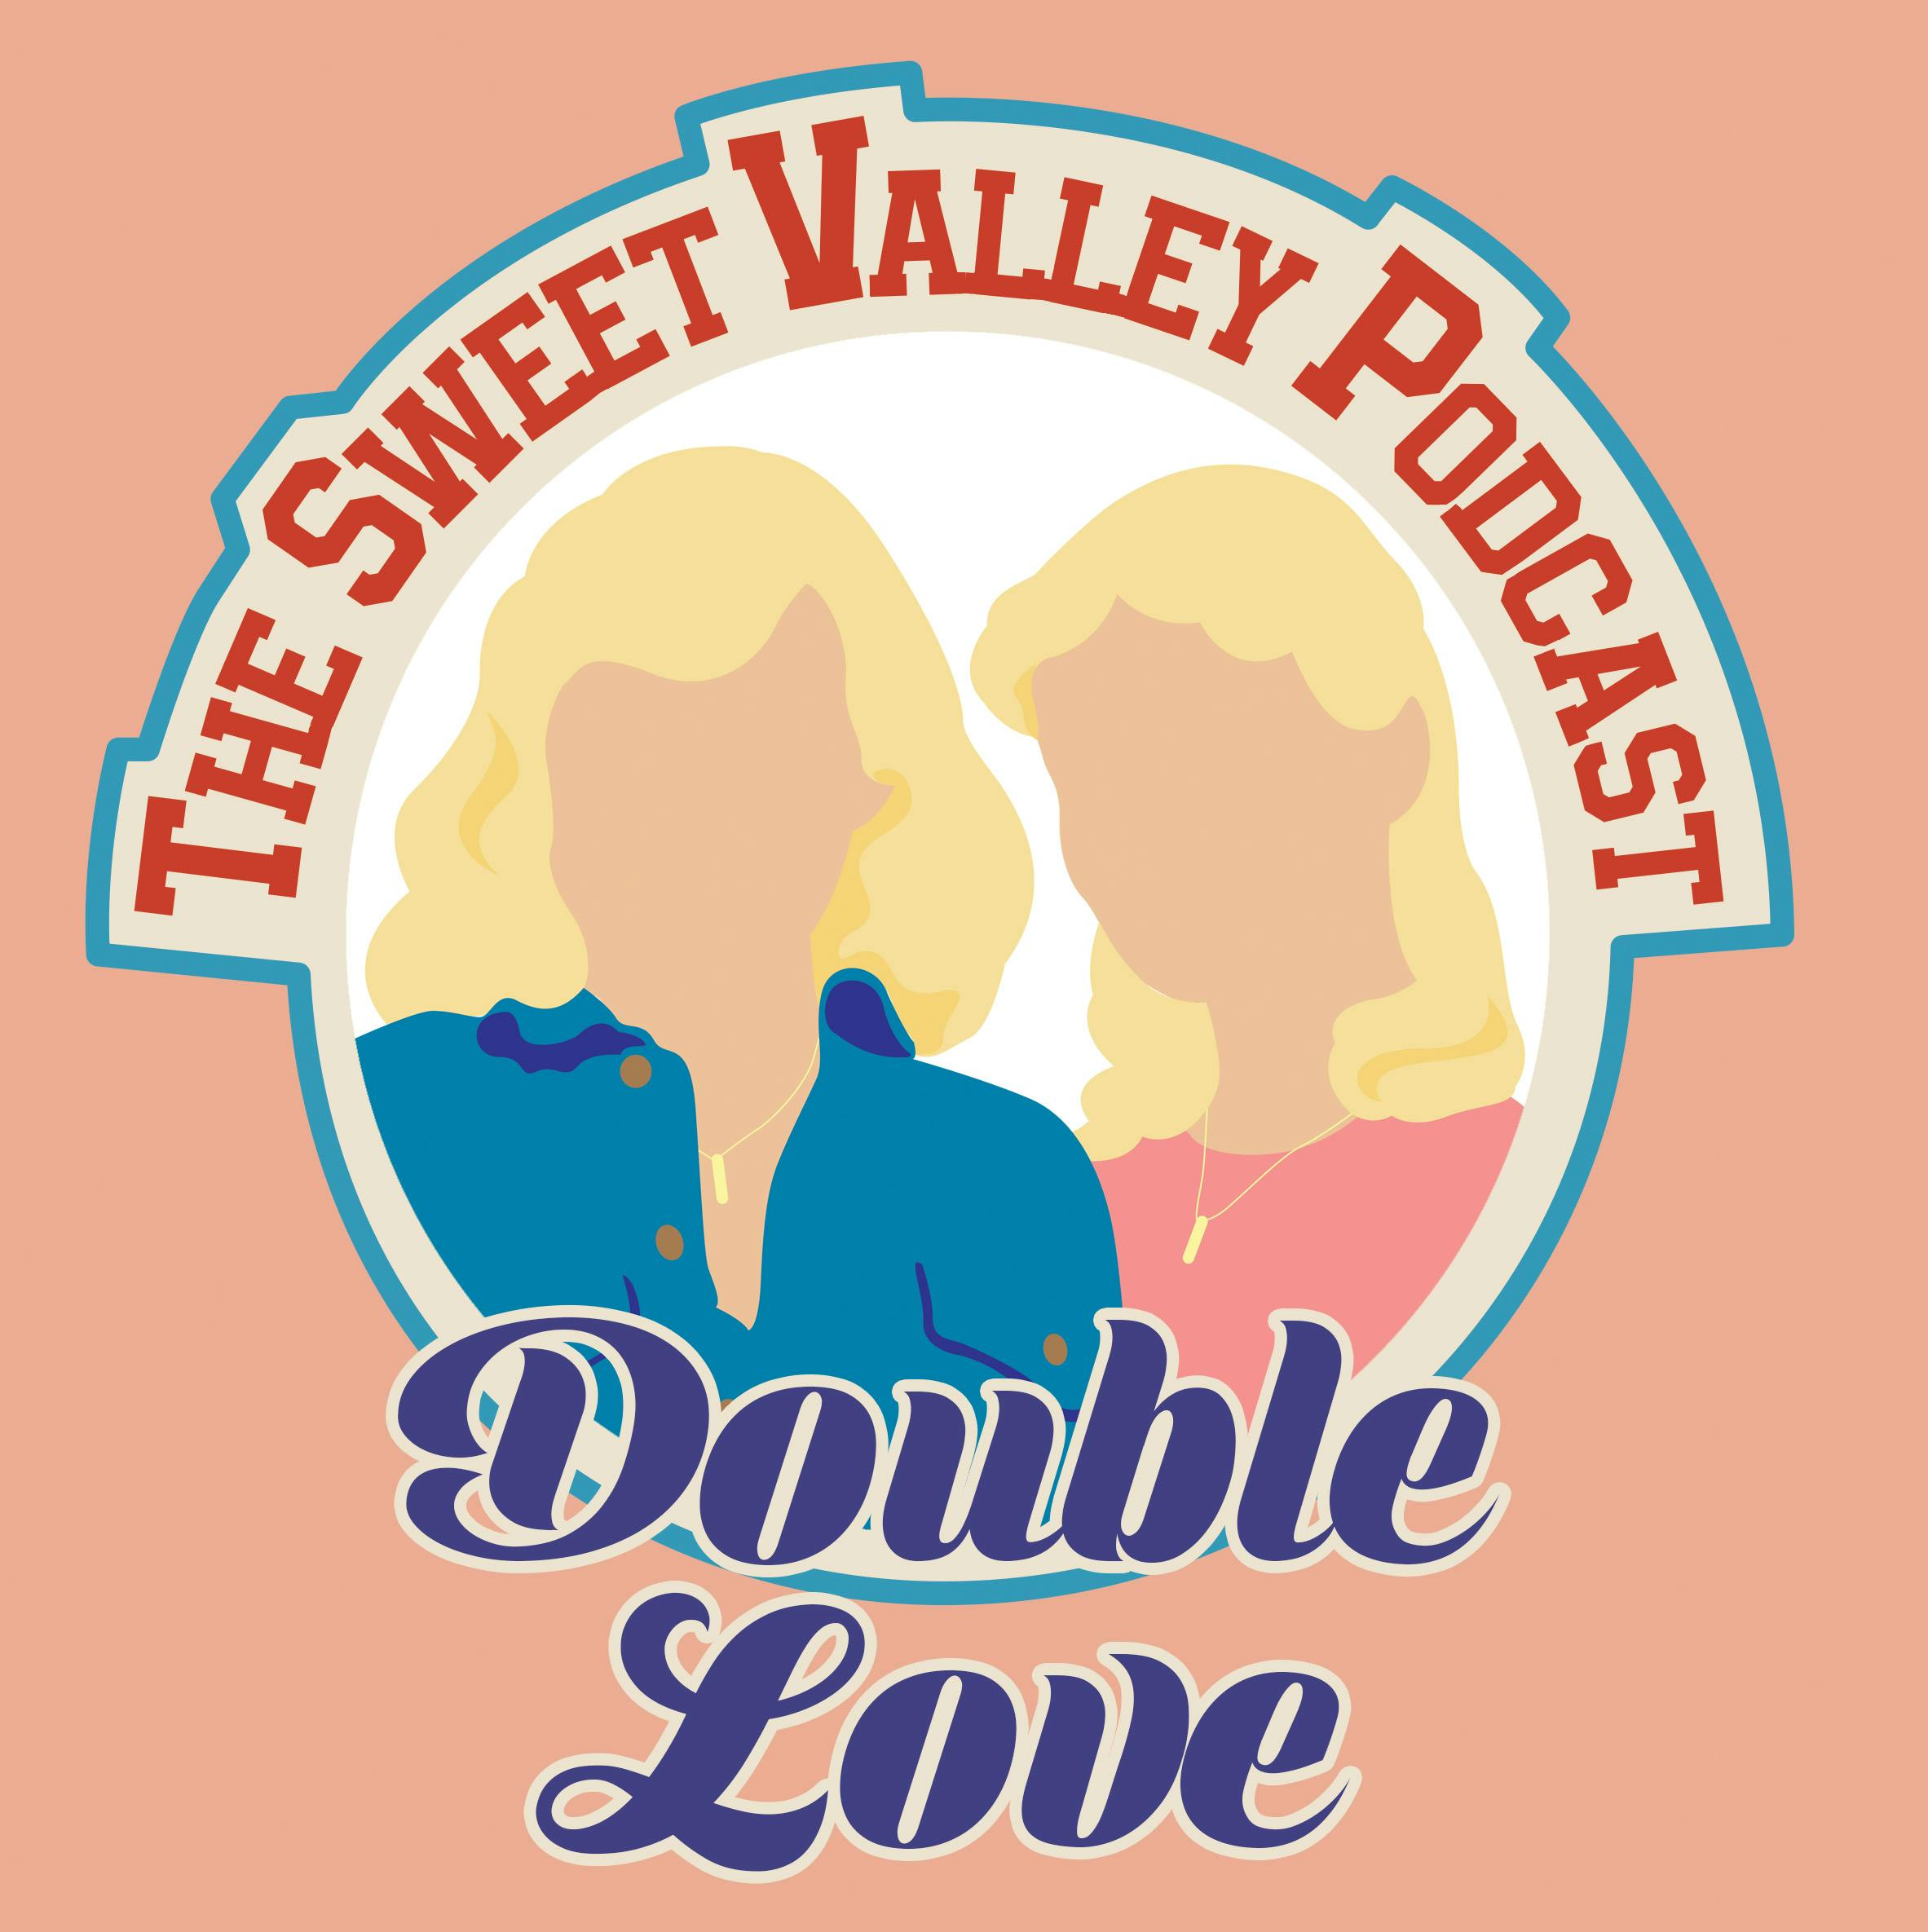 DOUBLE LOVE: FROM HERE TO SWEET VALLEY PART 2